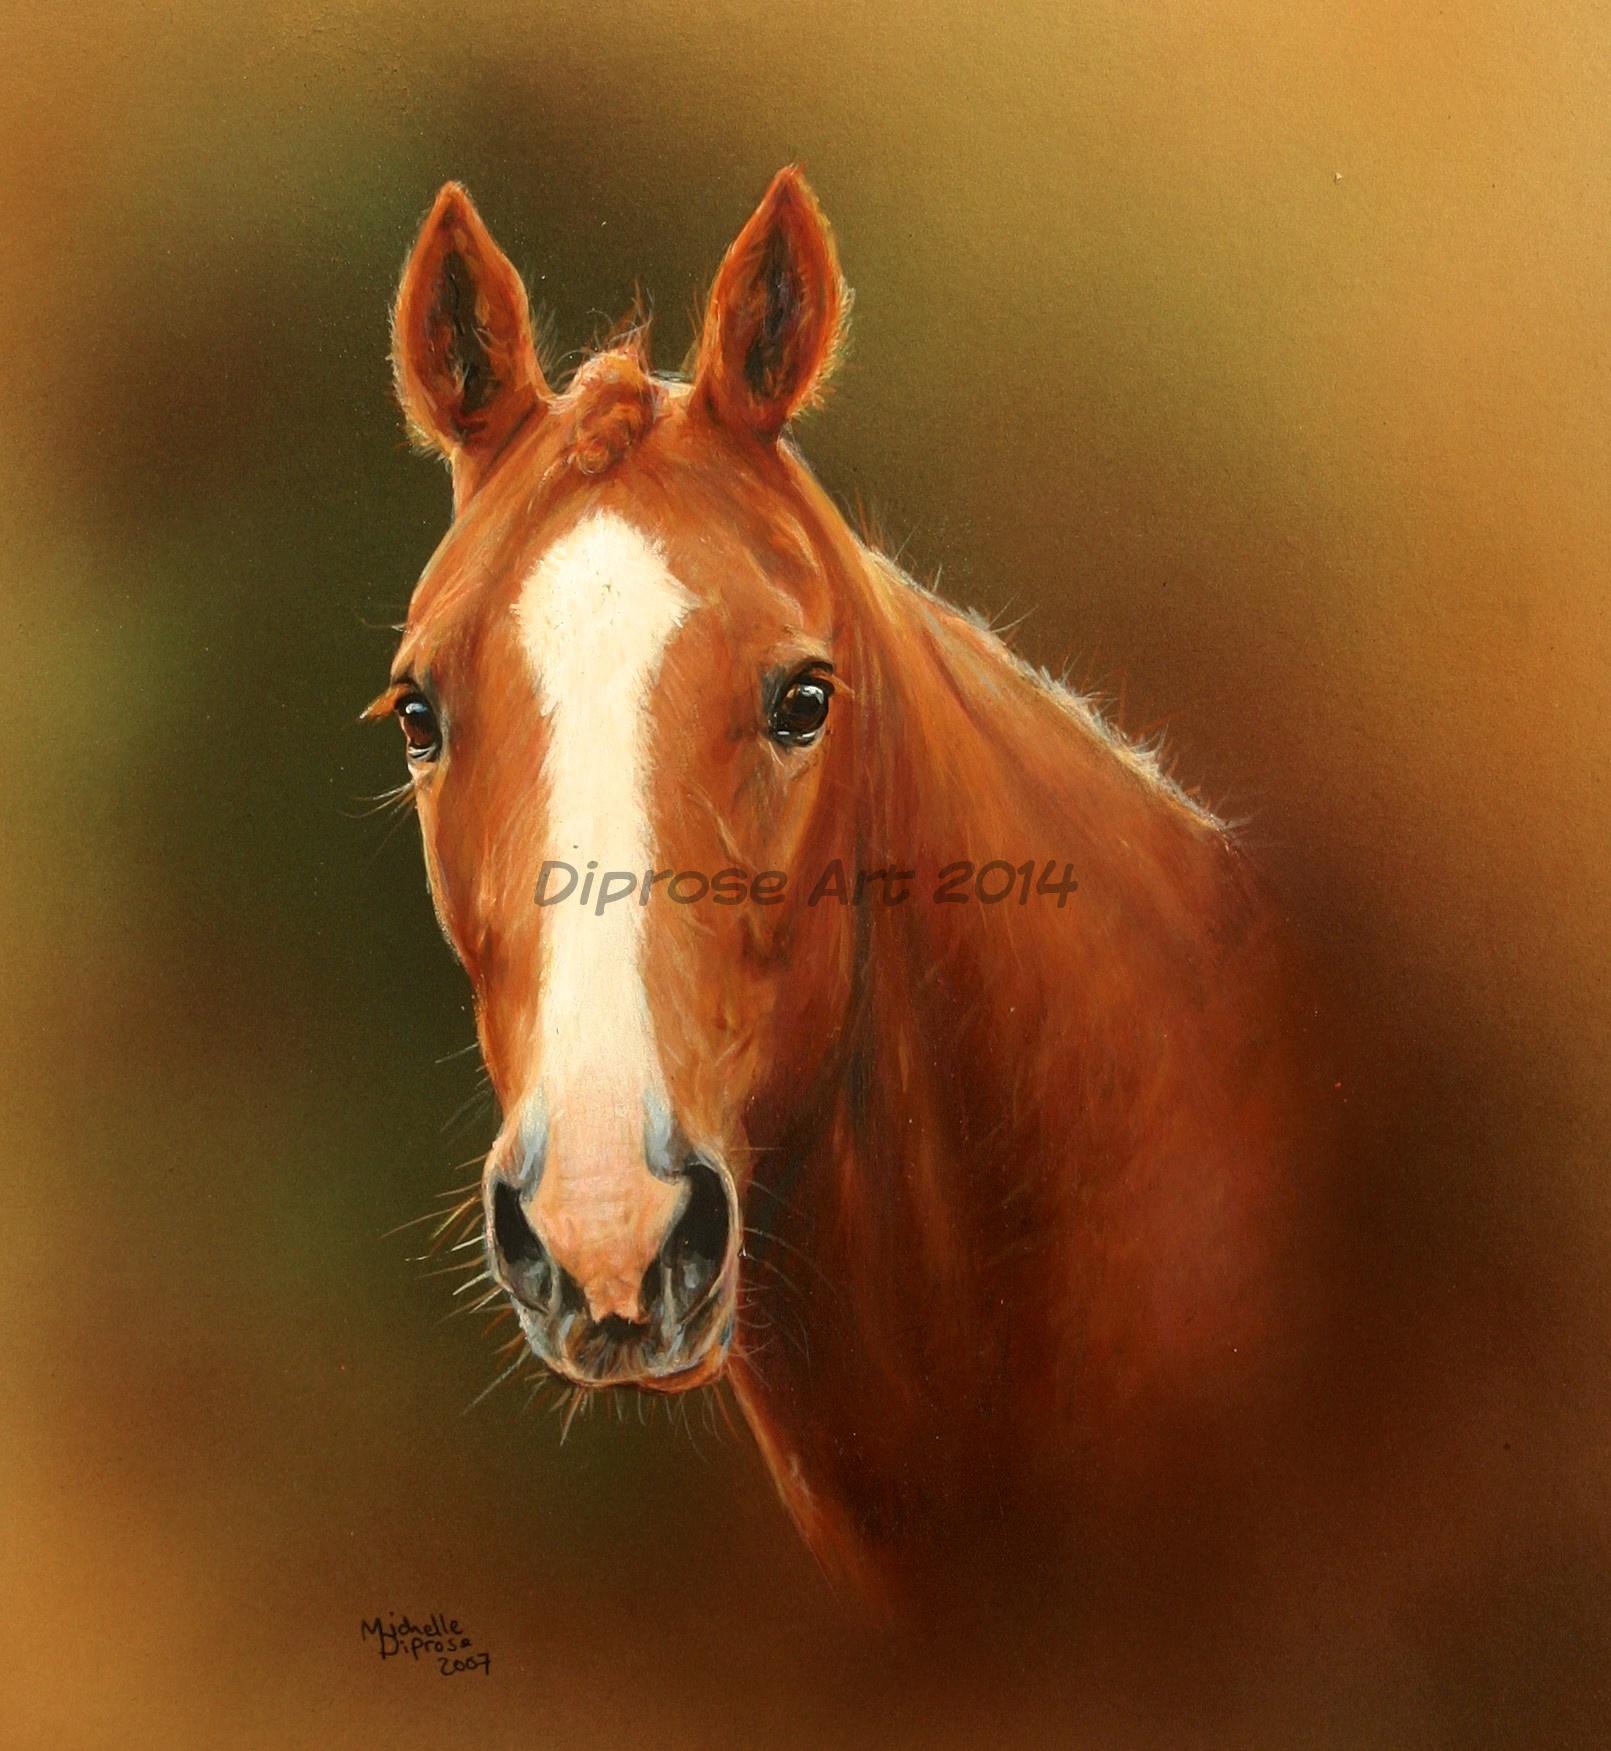 Acrylics on board - approx A4 -  horse portrait - I love this little horse&#039;s face - so expressive.  